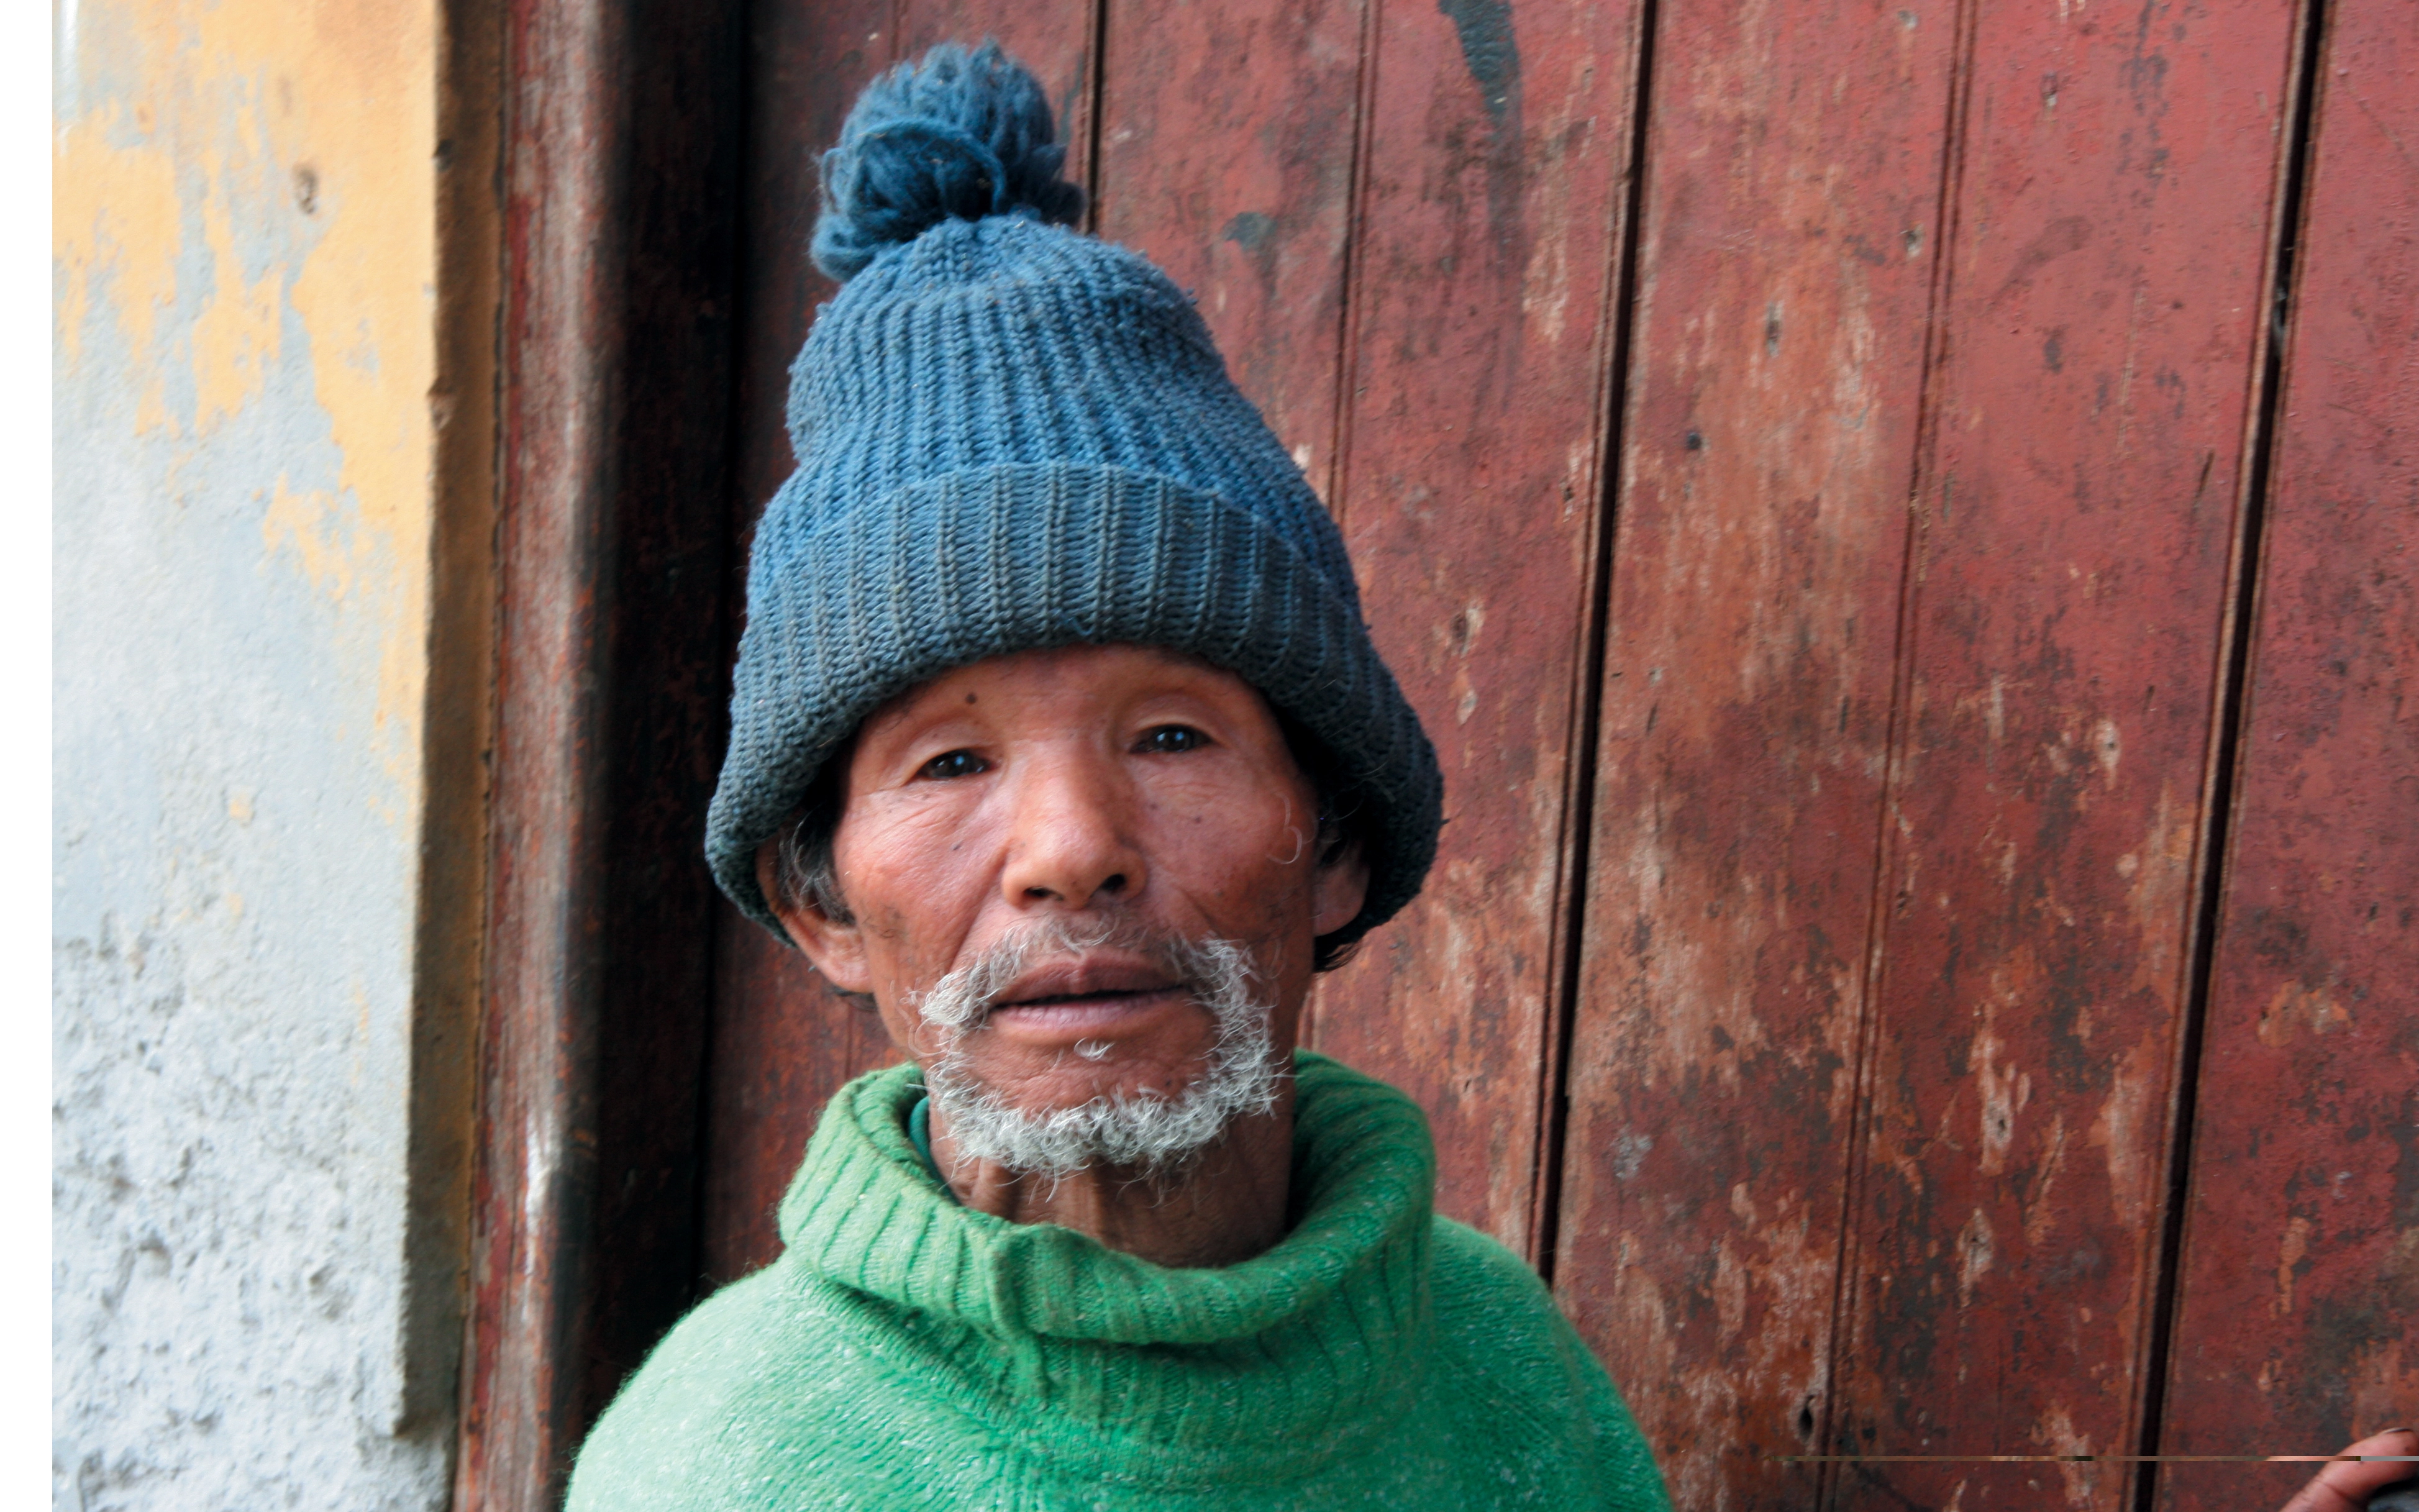 Local residents of Darjeeling, characterized by their Tibetan or Mongolian facial features, reflecting the region's diverse cultural heritage.